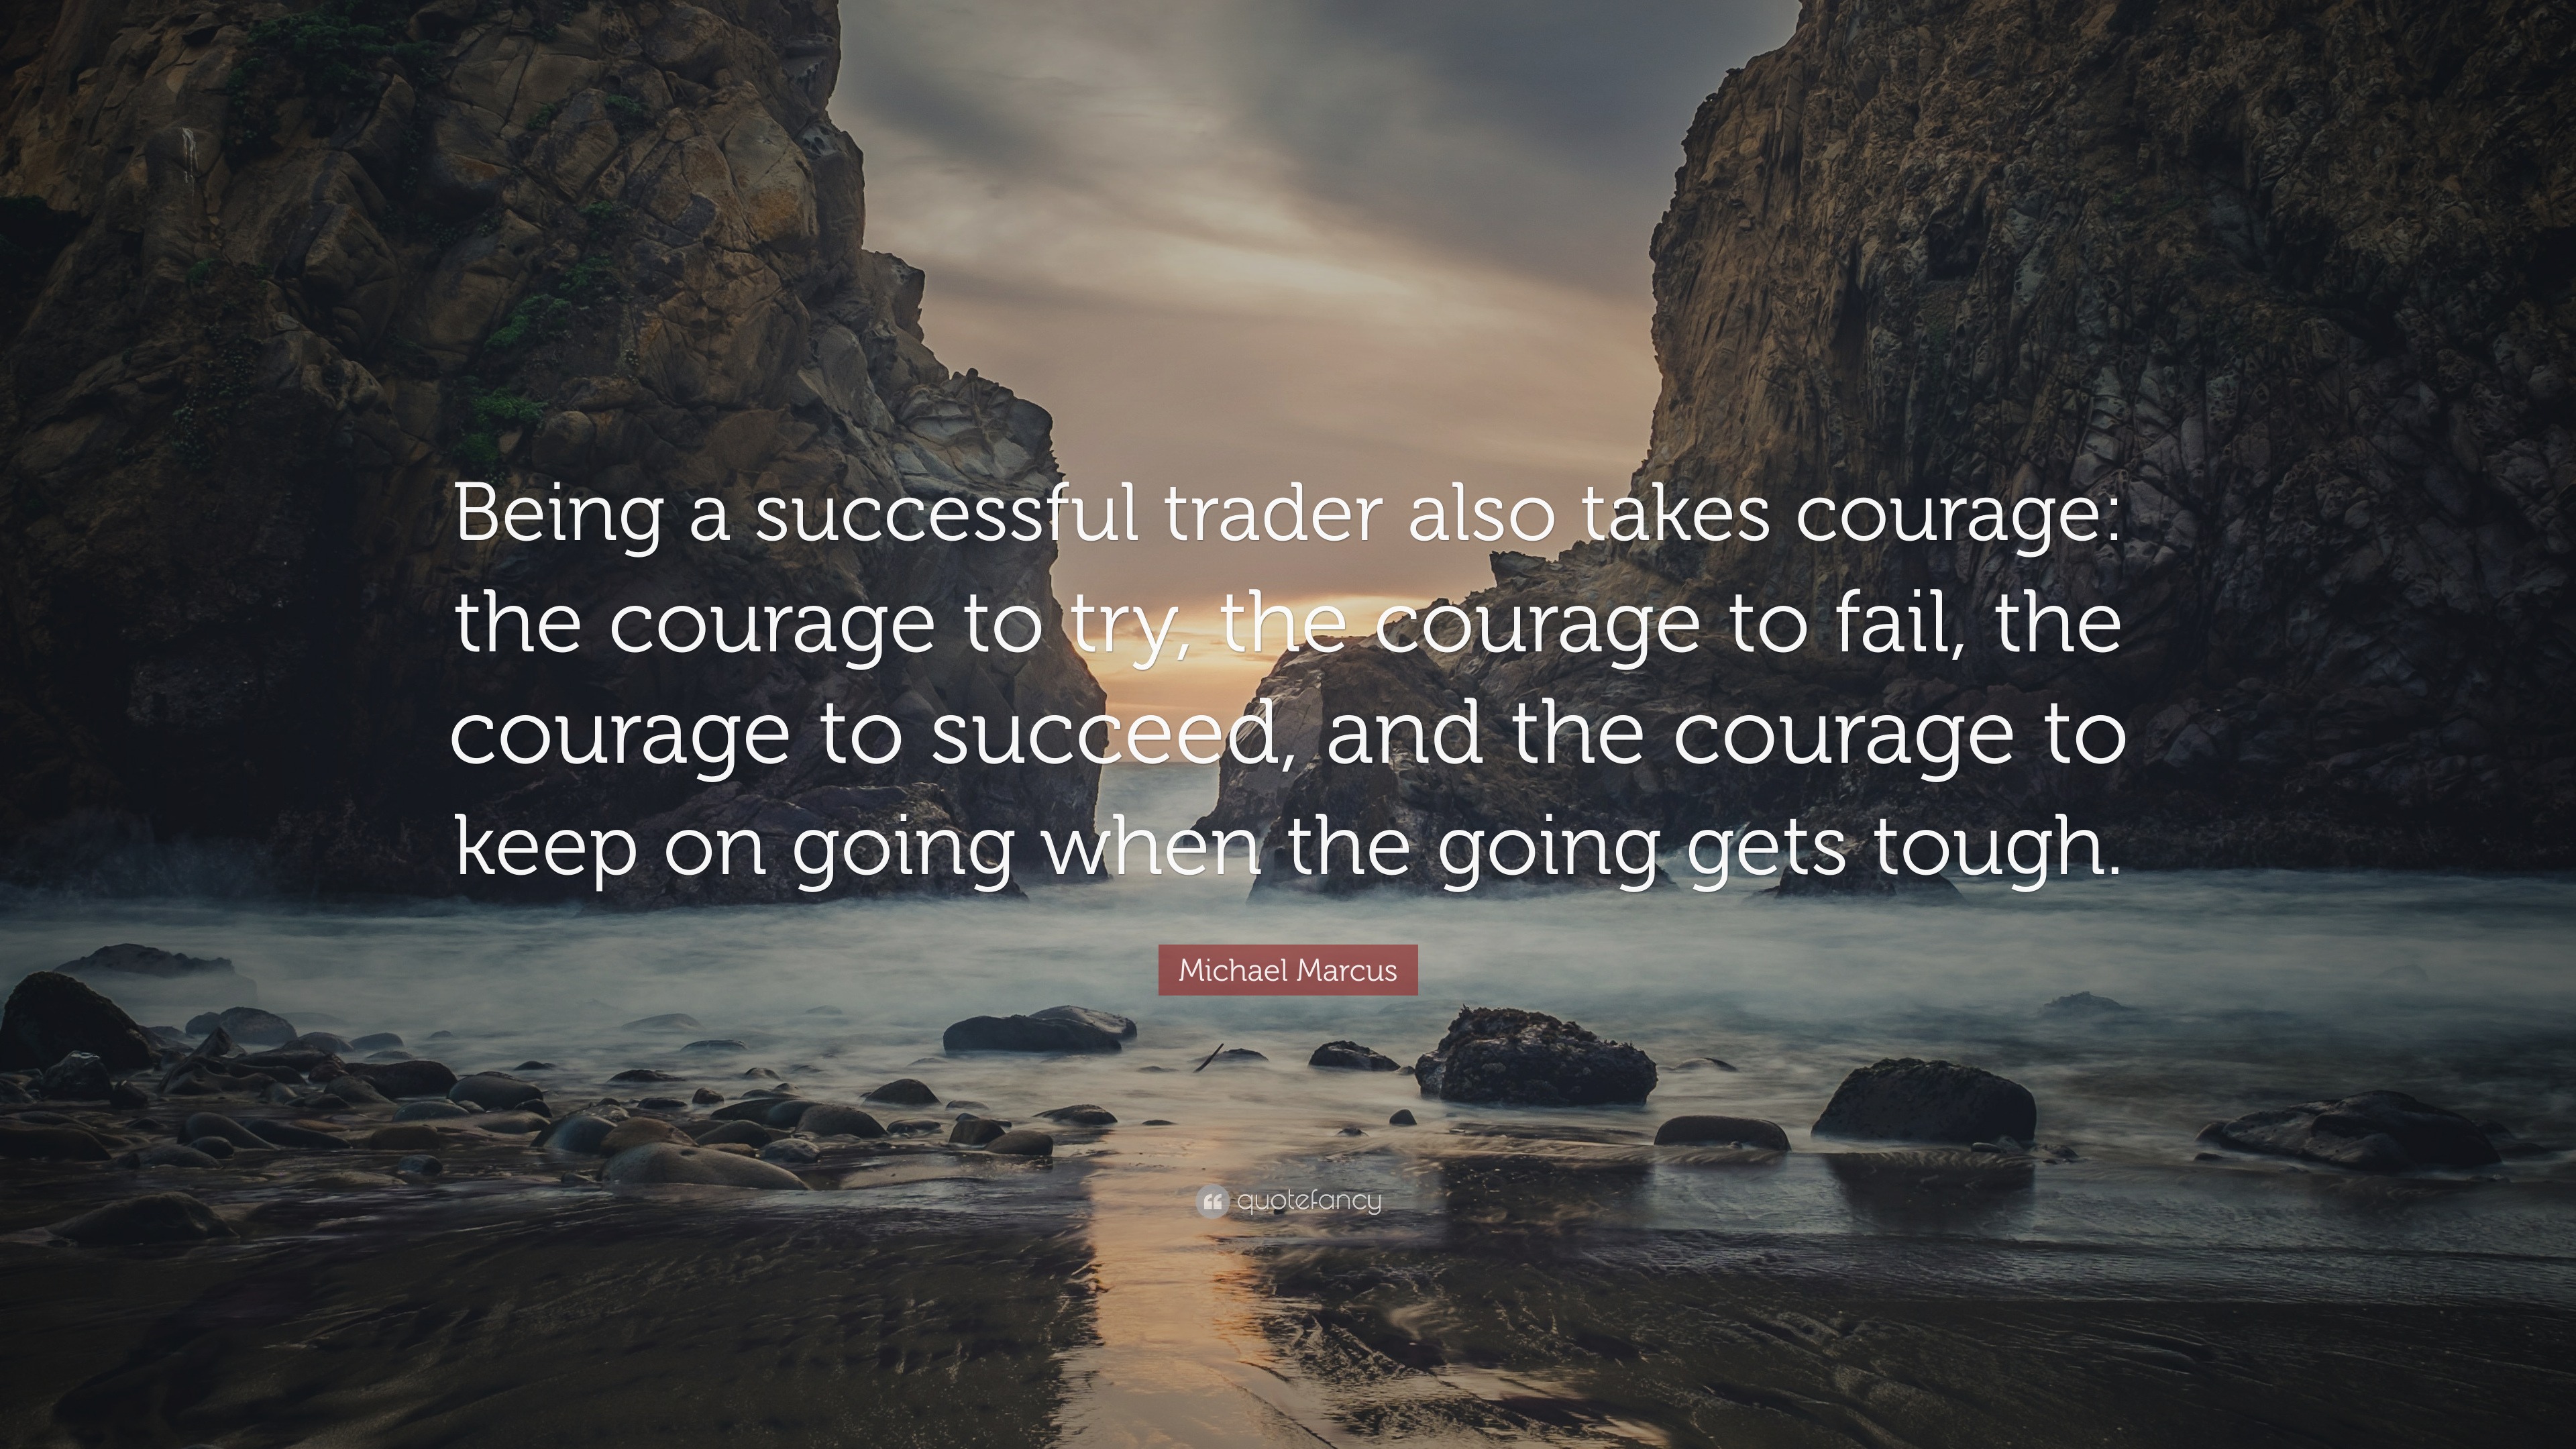 Michael Marcus Quote: "Being a successful trader also ...